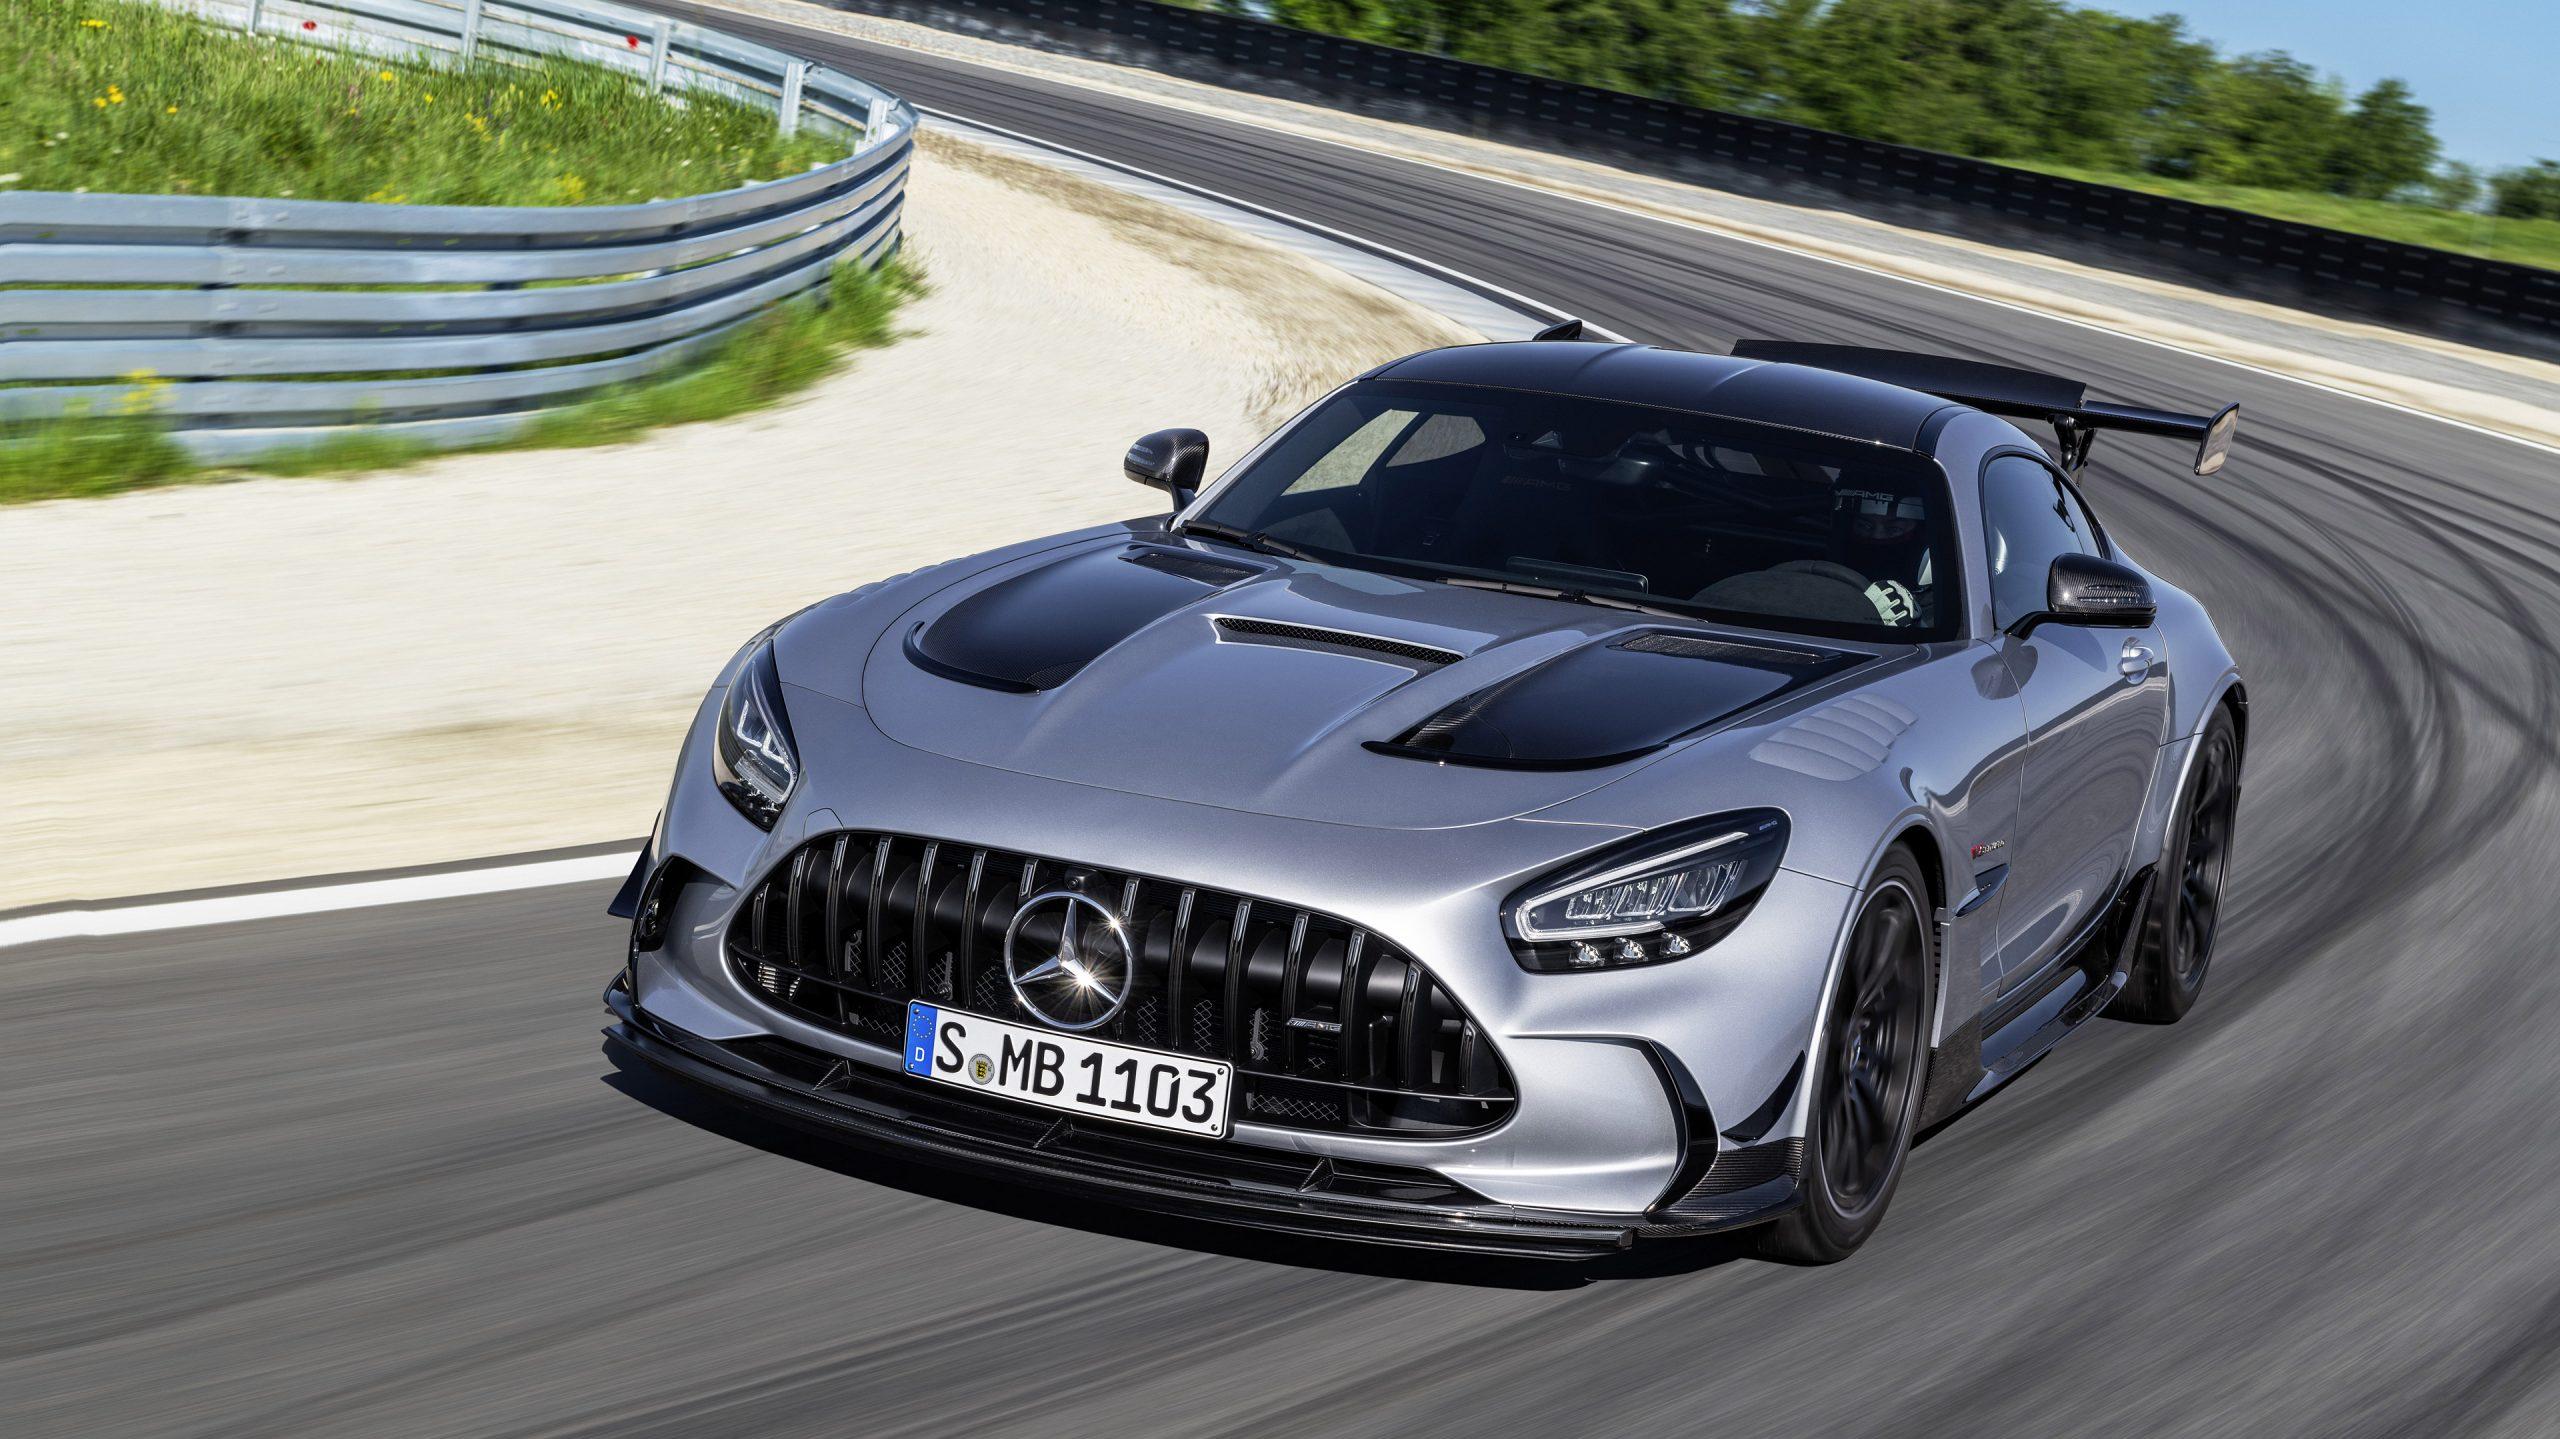 Mercedes Amg Gt Black Series Will Go To Australia And Be Capped At